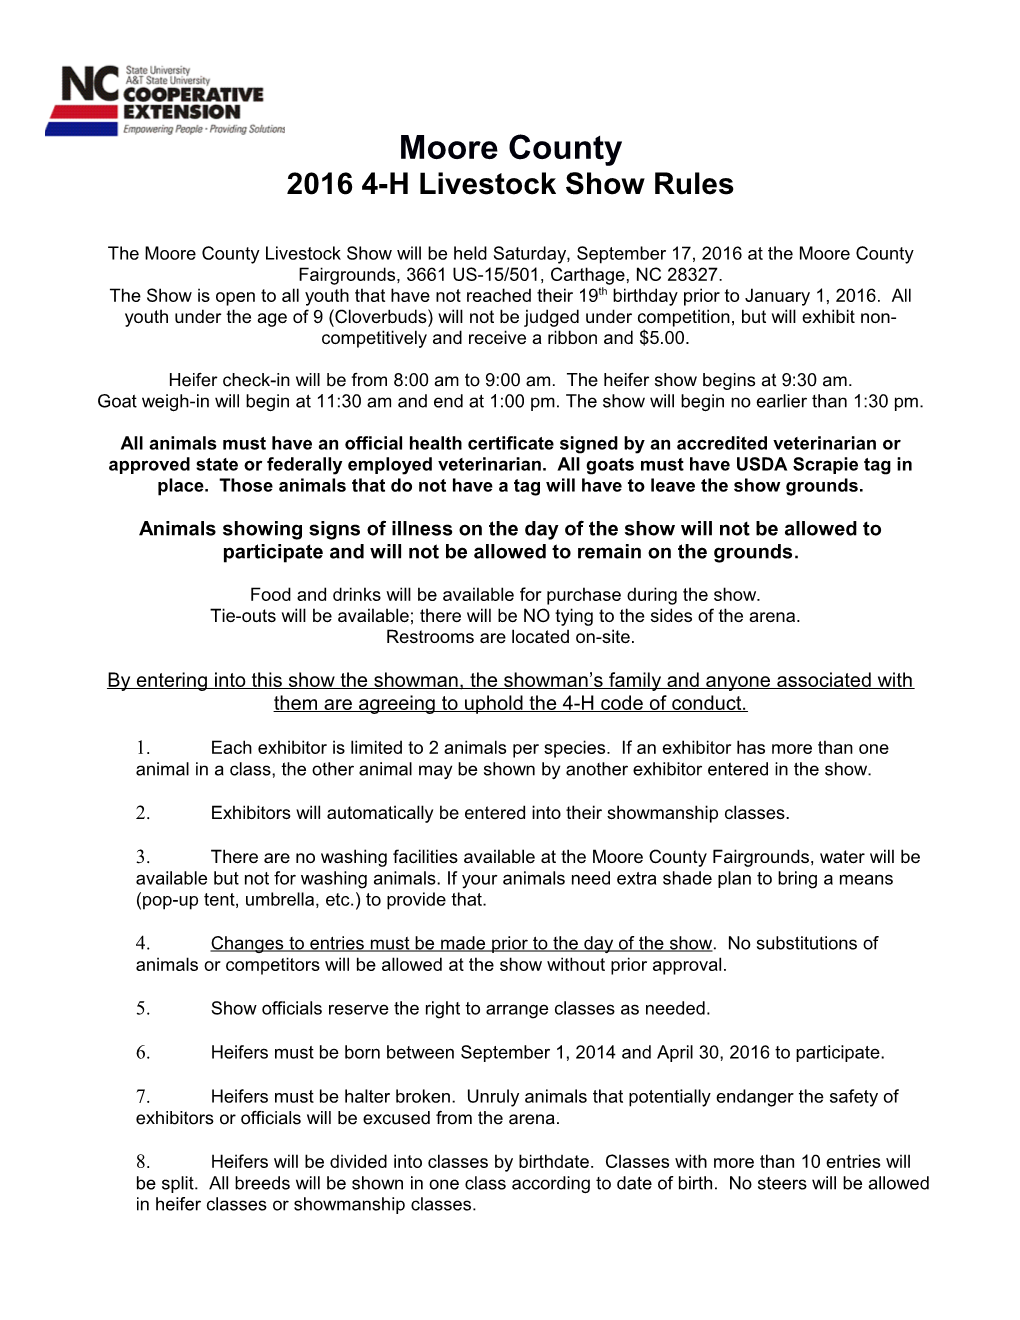 2016 4-H Livestock Show Rules